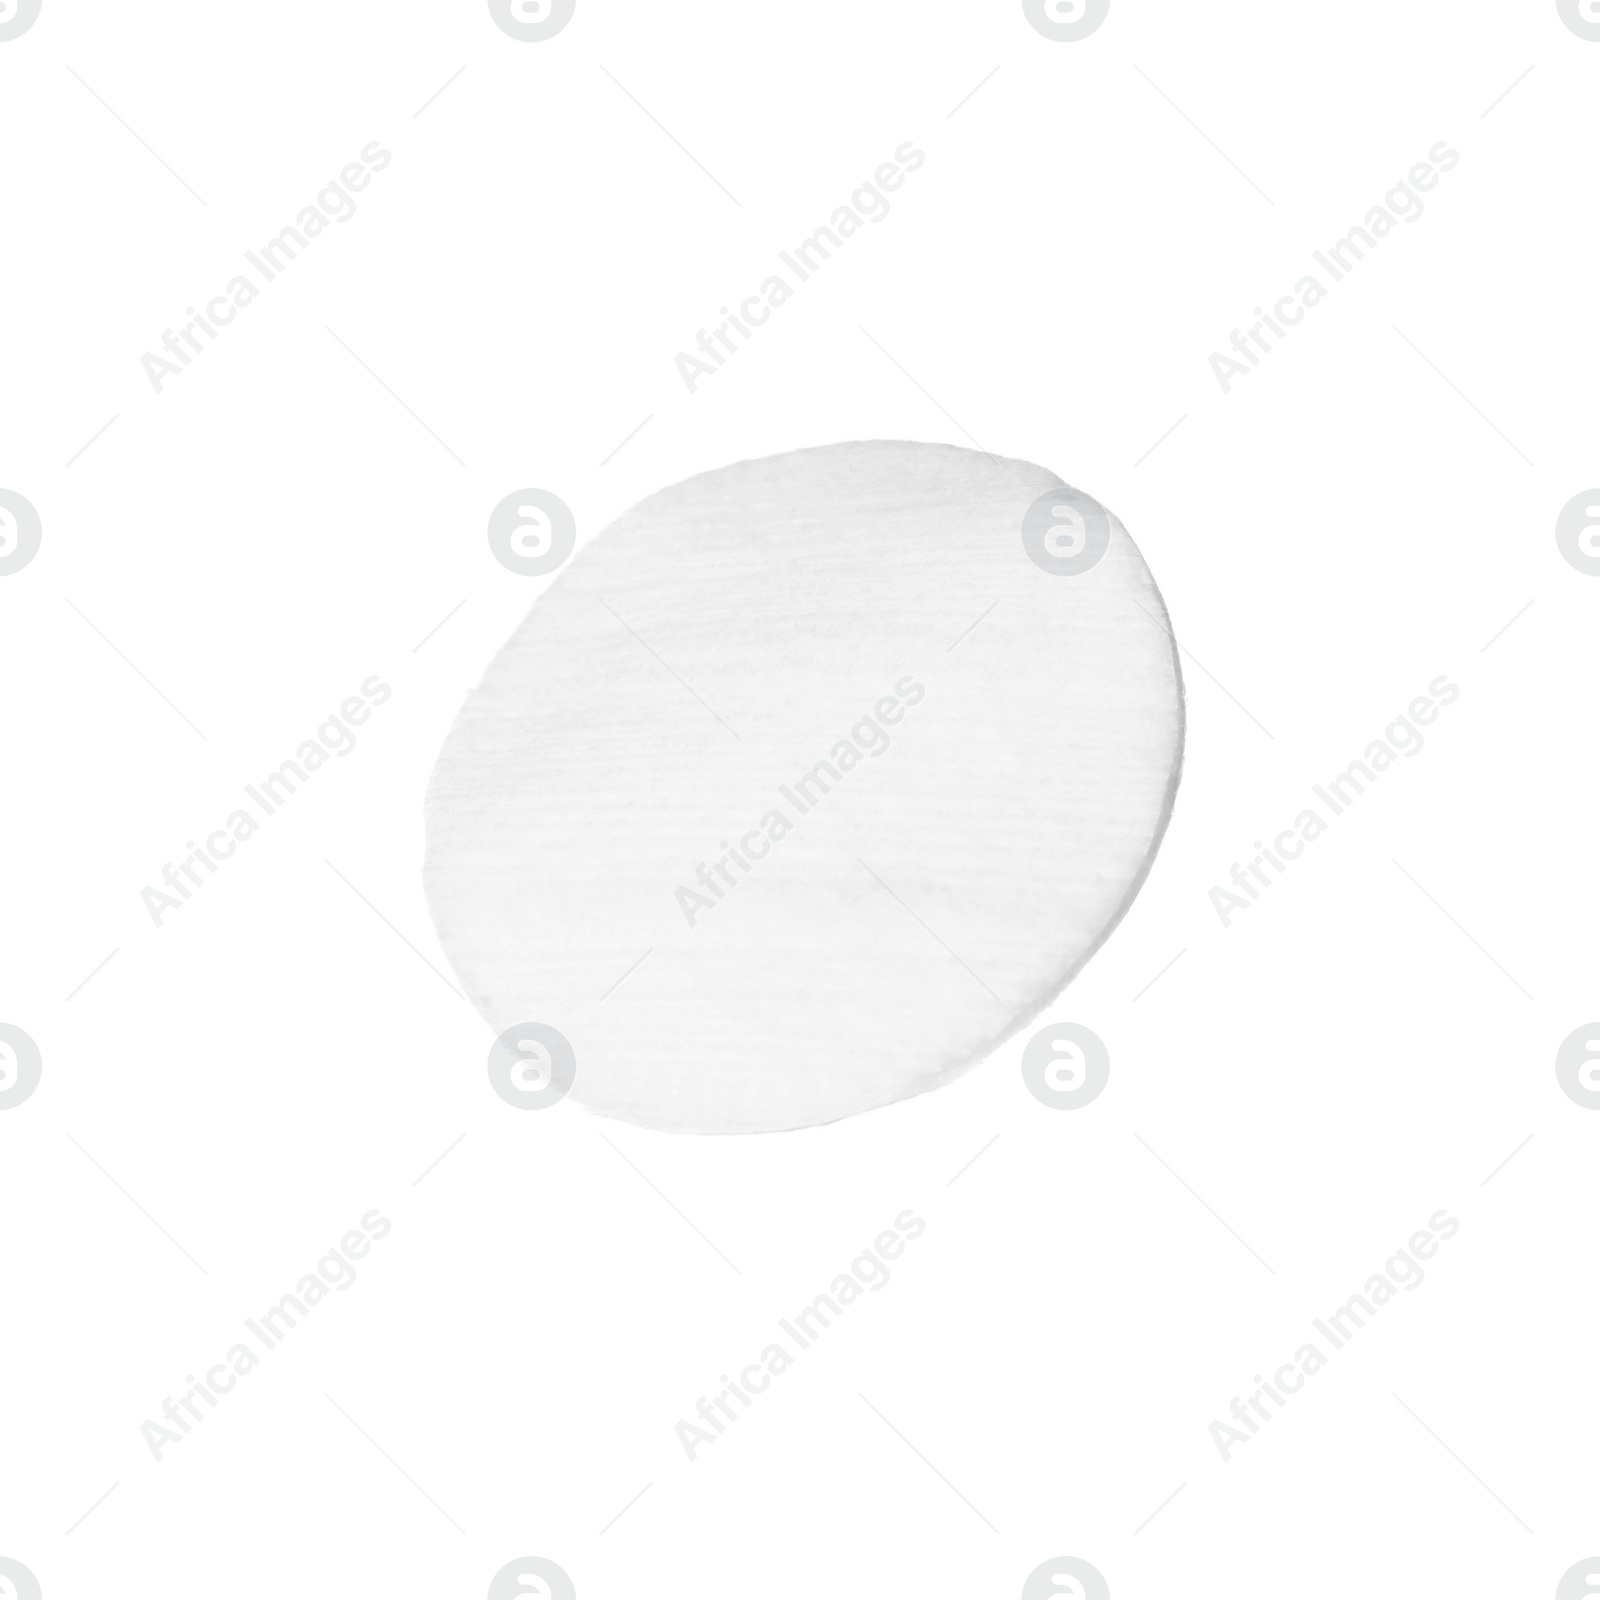 Photo of One clean cotton pad isolated on white